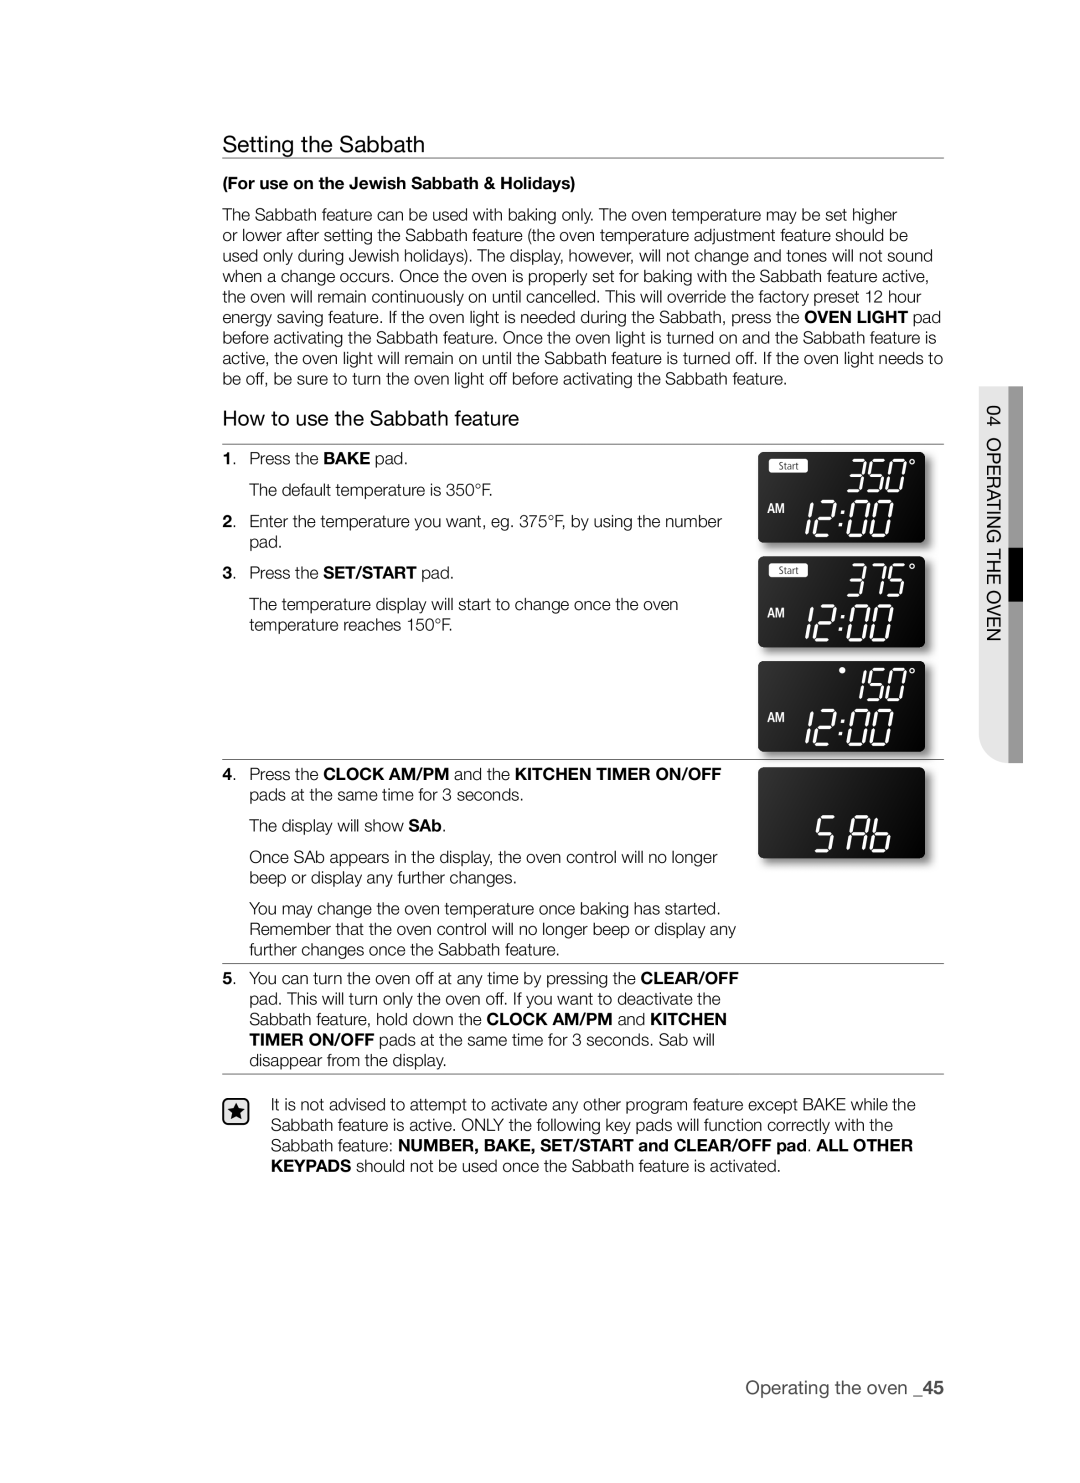 Samsung FE-R500WW user manual Setting the Sabbath, How to use the Sabbath feature, Operating The Oven, Operating the oven 